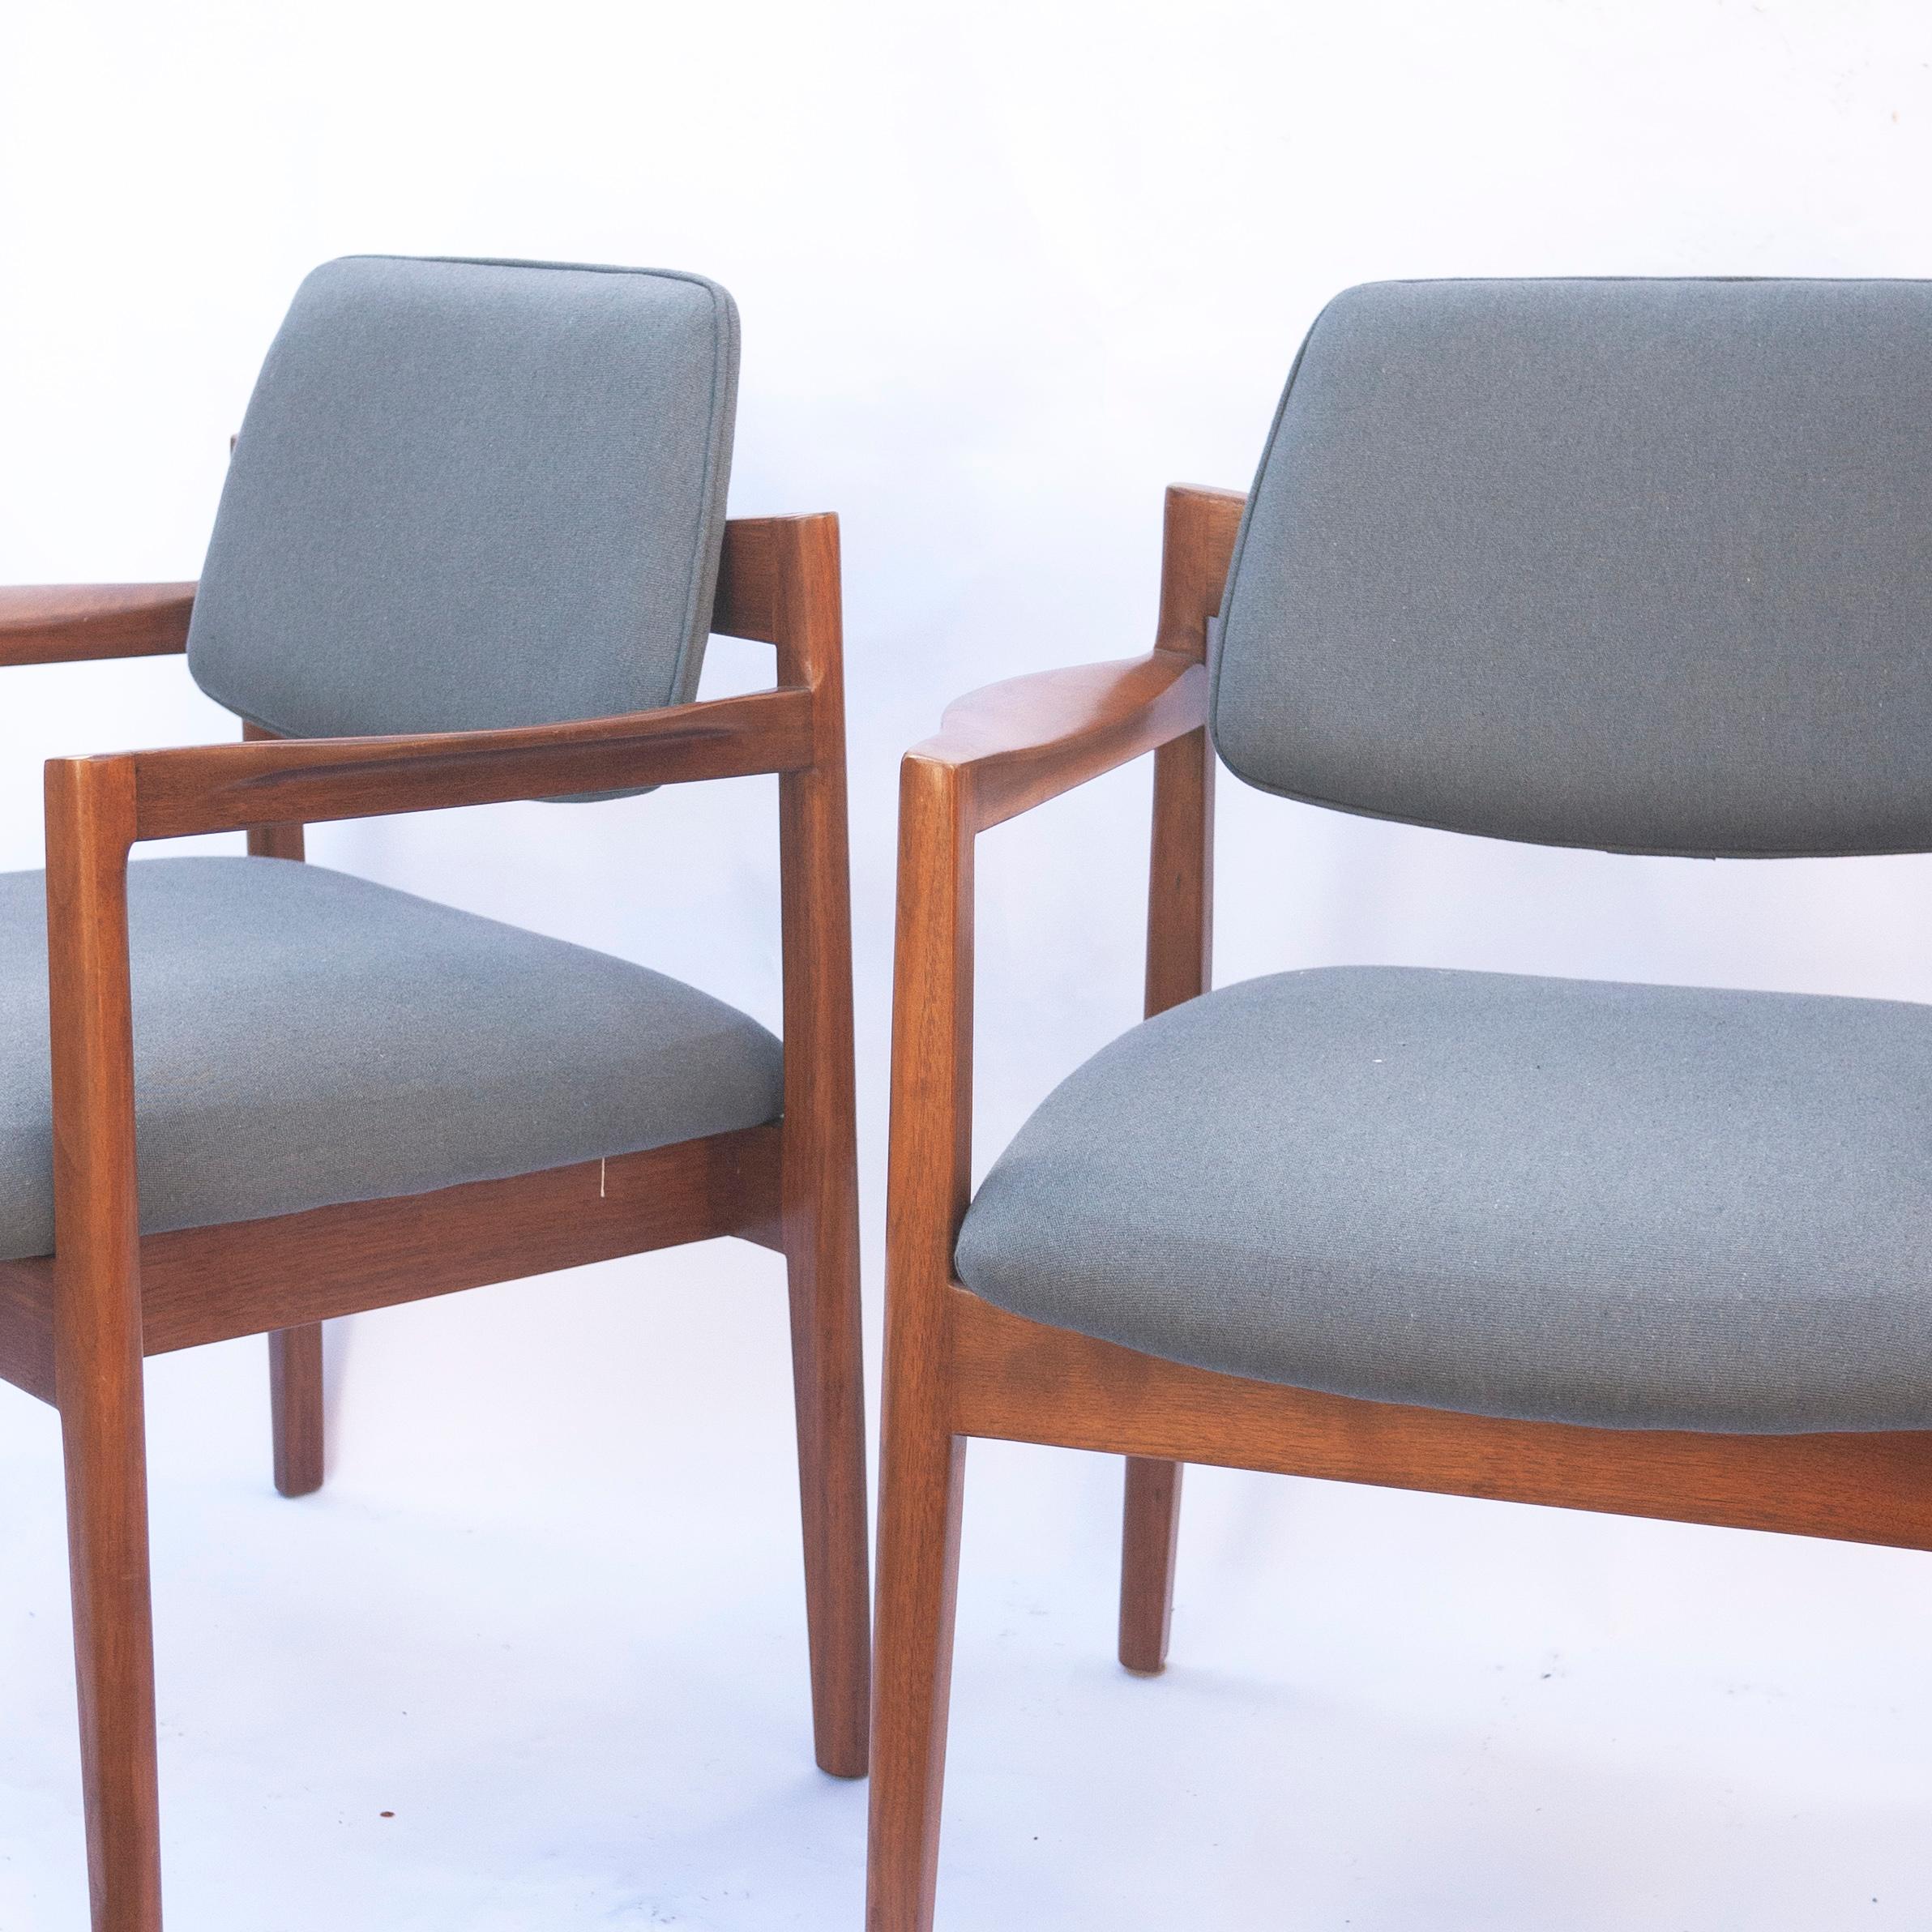 Fabric Pair of Arm Chairs by Jens Risom for Knoll in Walnut and Newly Upholstered  For Sale